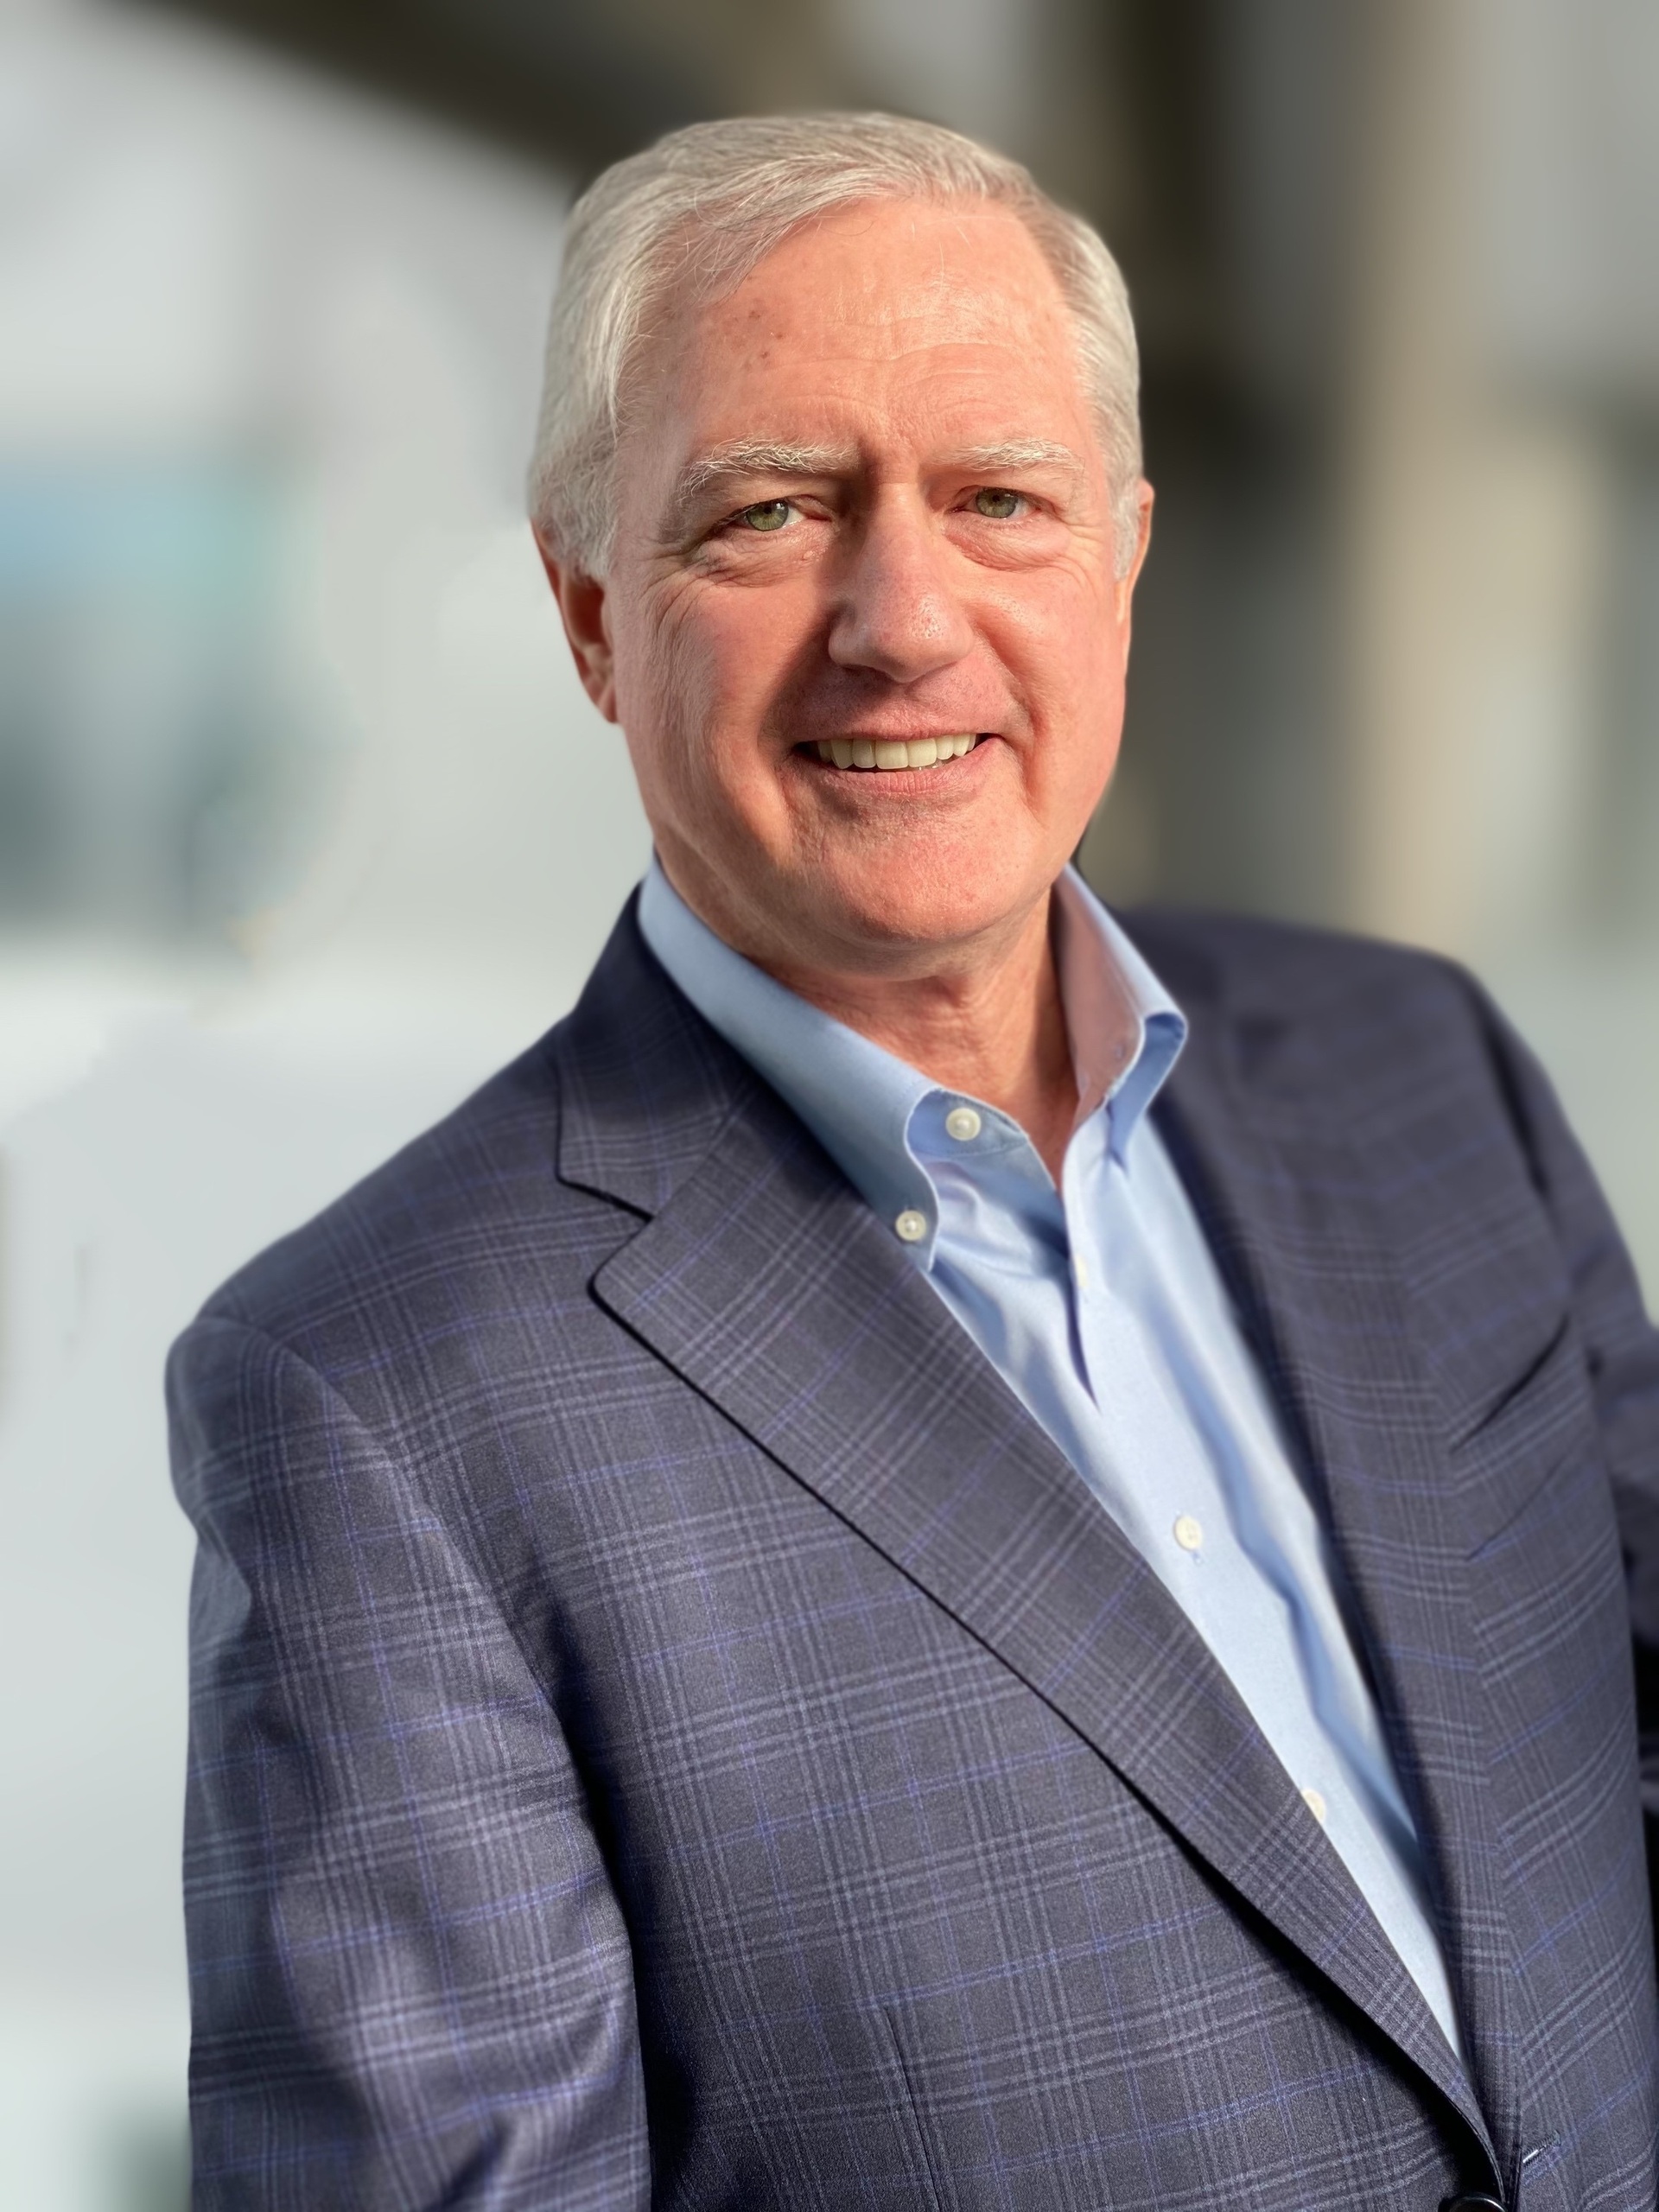 John O‘Leary appointed President and Chief Executive Officer of Daimler Trucks North America